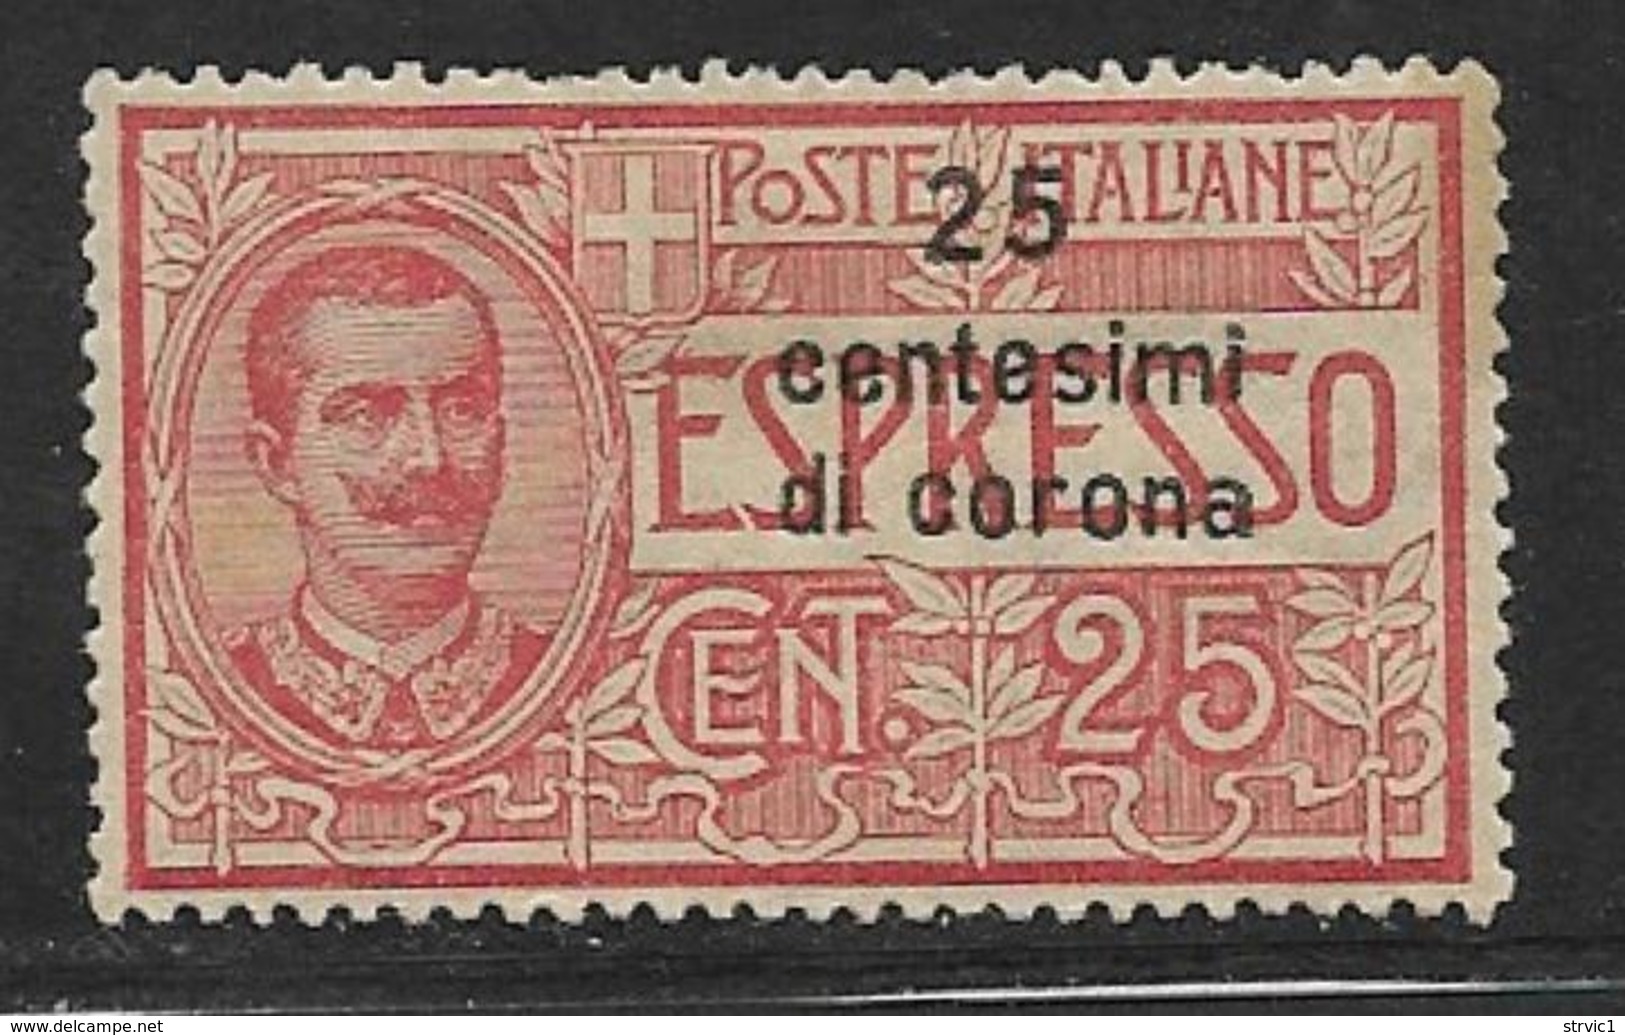 Italy Occupation Dalmatia Scott # E1 Mint Hinged Italy Special Delivery Stamp Surcharged, 1921 - Dalmazia